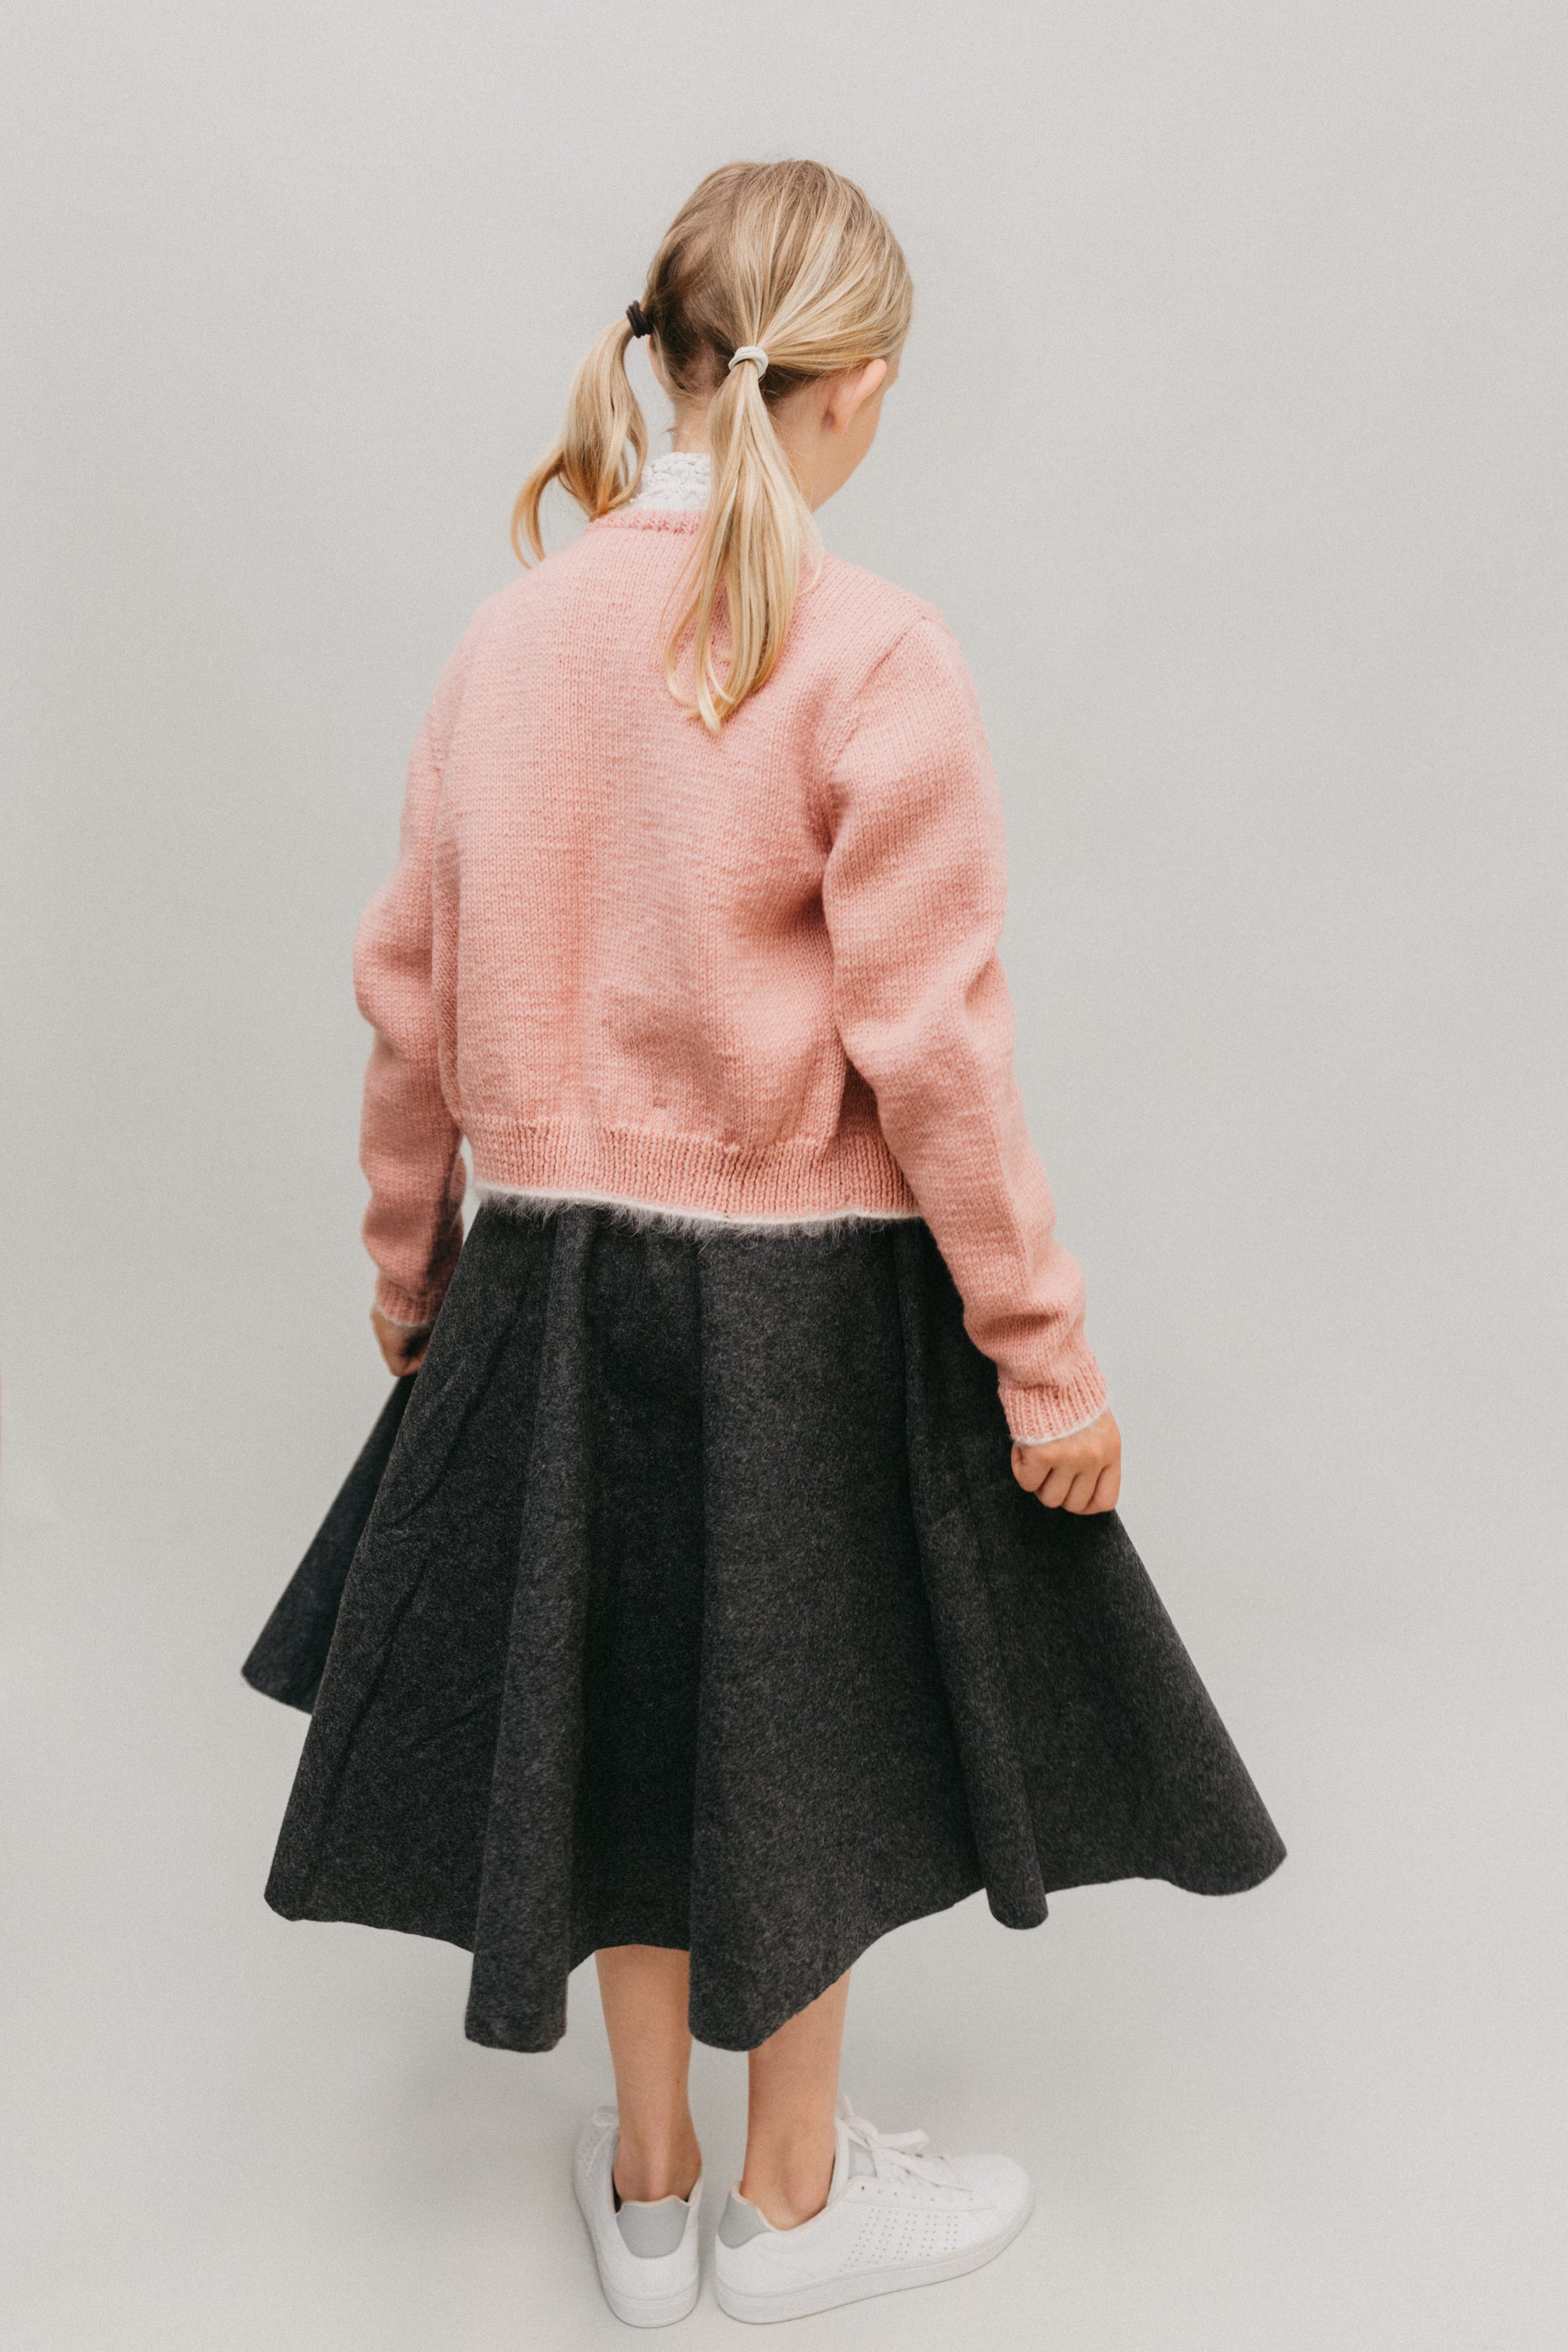 Back view of young blonde girl wearing the At The Hop Sweater and skirt